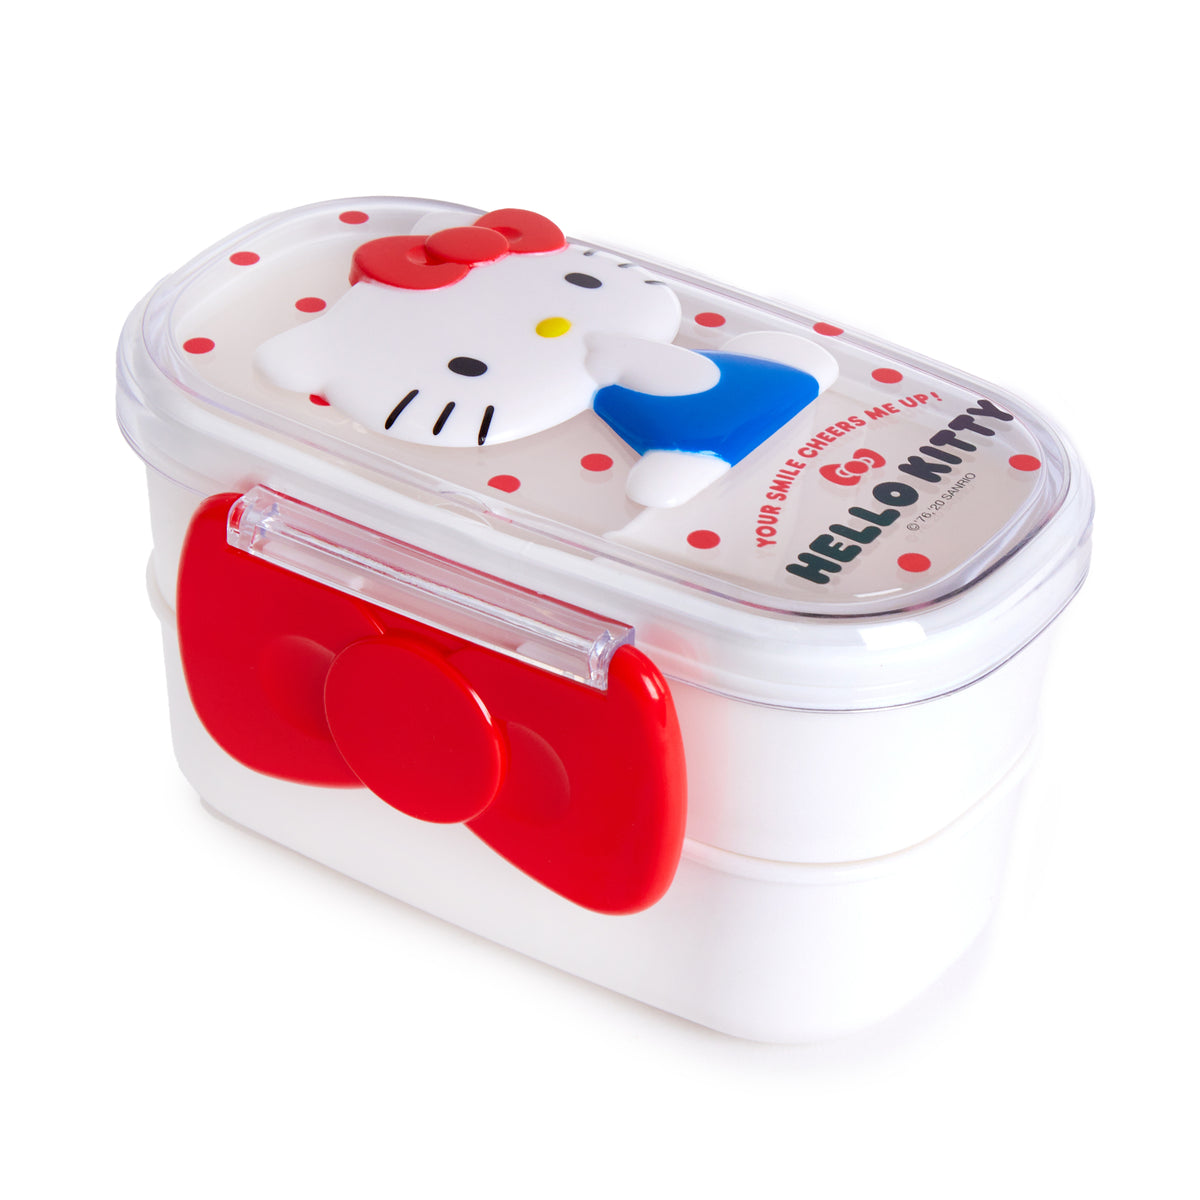 Hello Kitty 2-Tier Relief Lunch Case Home Goods JAPAN ORIGINAL   